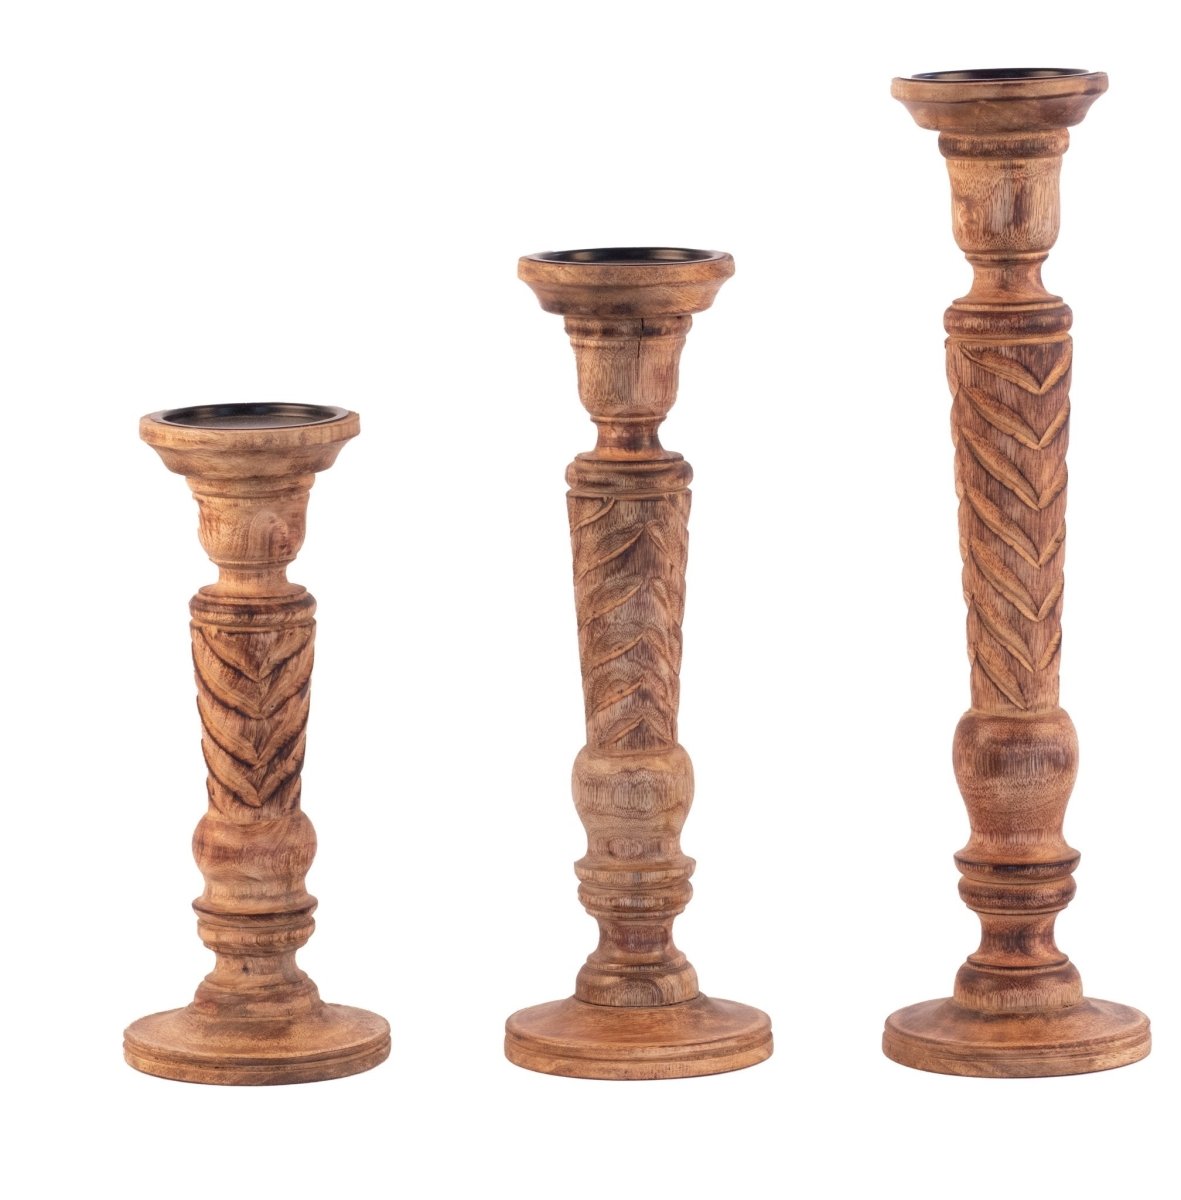 Kezevel Wooden Candle Stand - Artistic 18" H Antique Brown Mango Wood Candle Holders for Home Decoration , Room Decoration